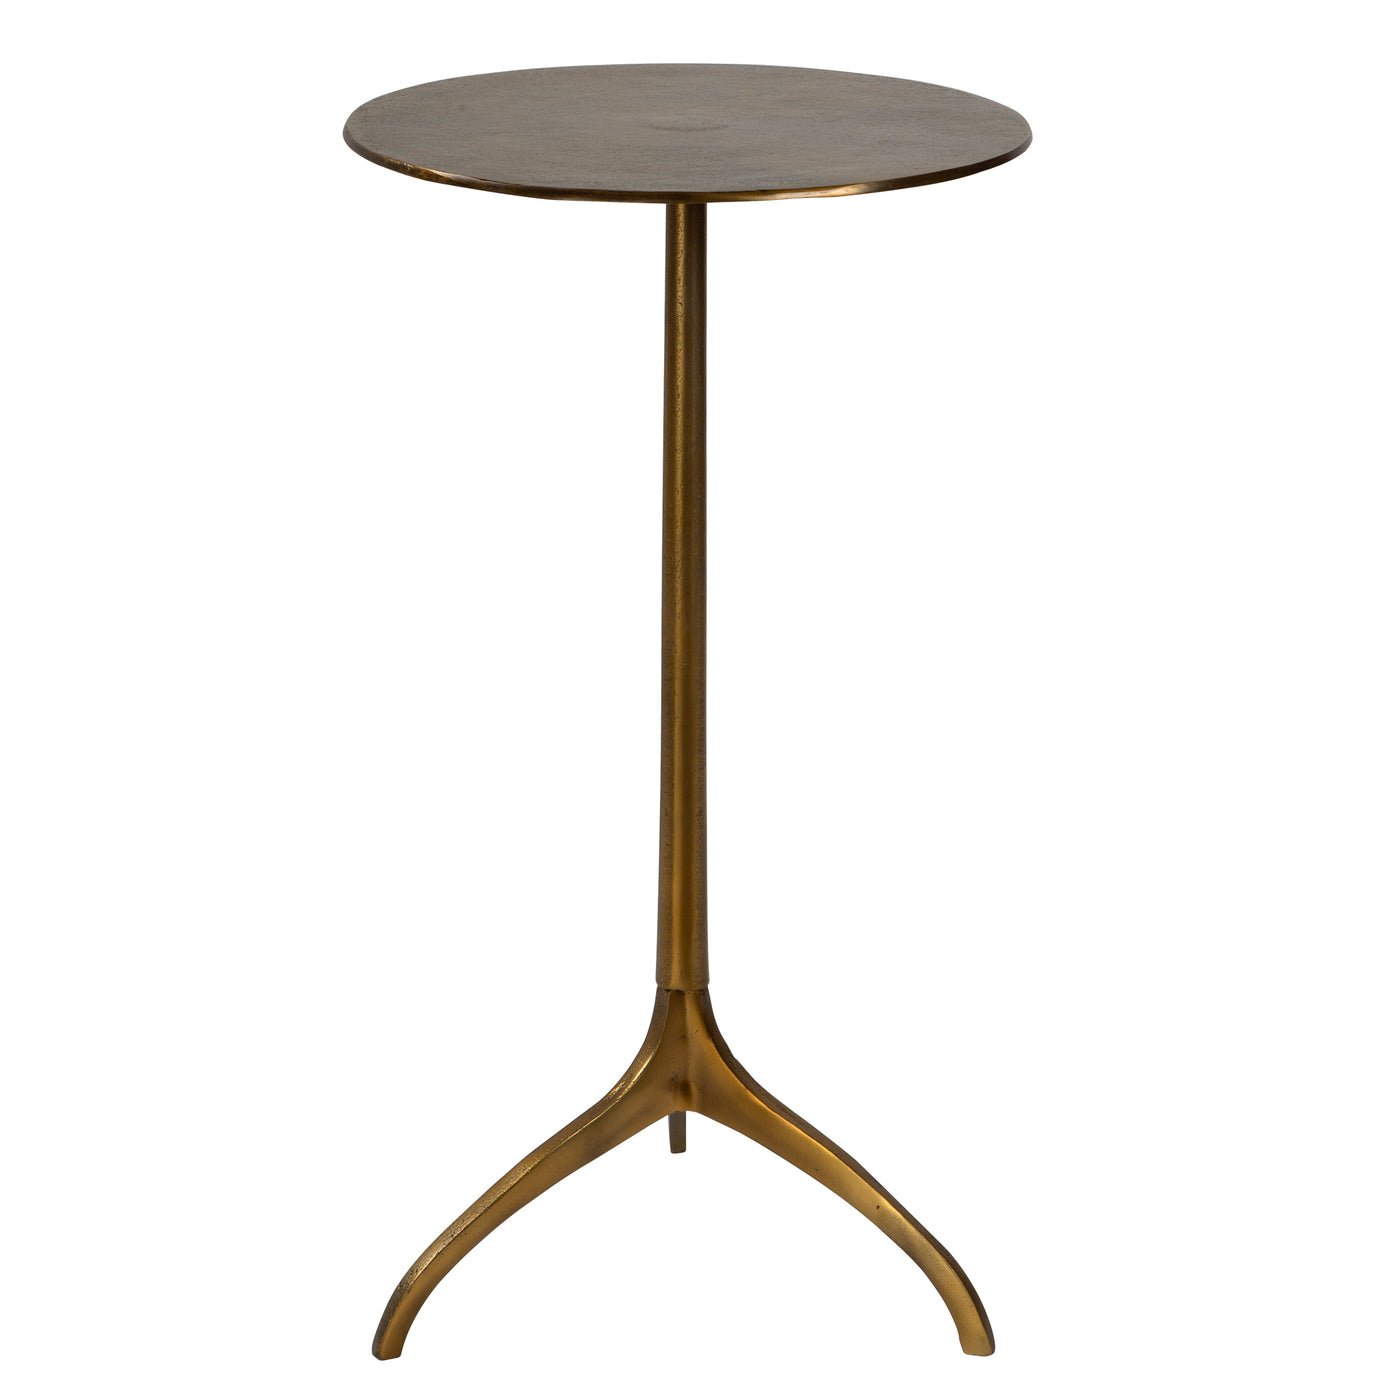 Showcasing Industrial Styling, This Hand Crafted Accent Table Features An Solid Cast Aluminum Construction With A Tripod B...